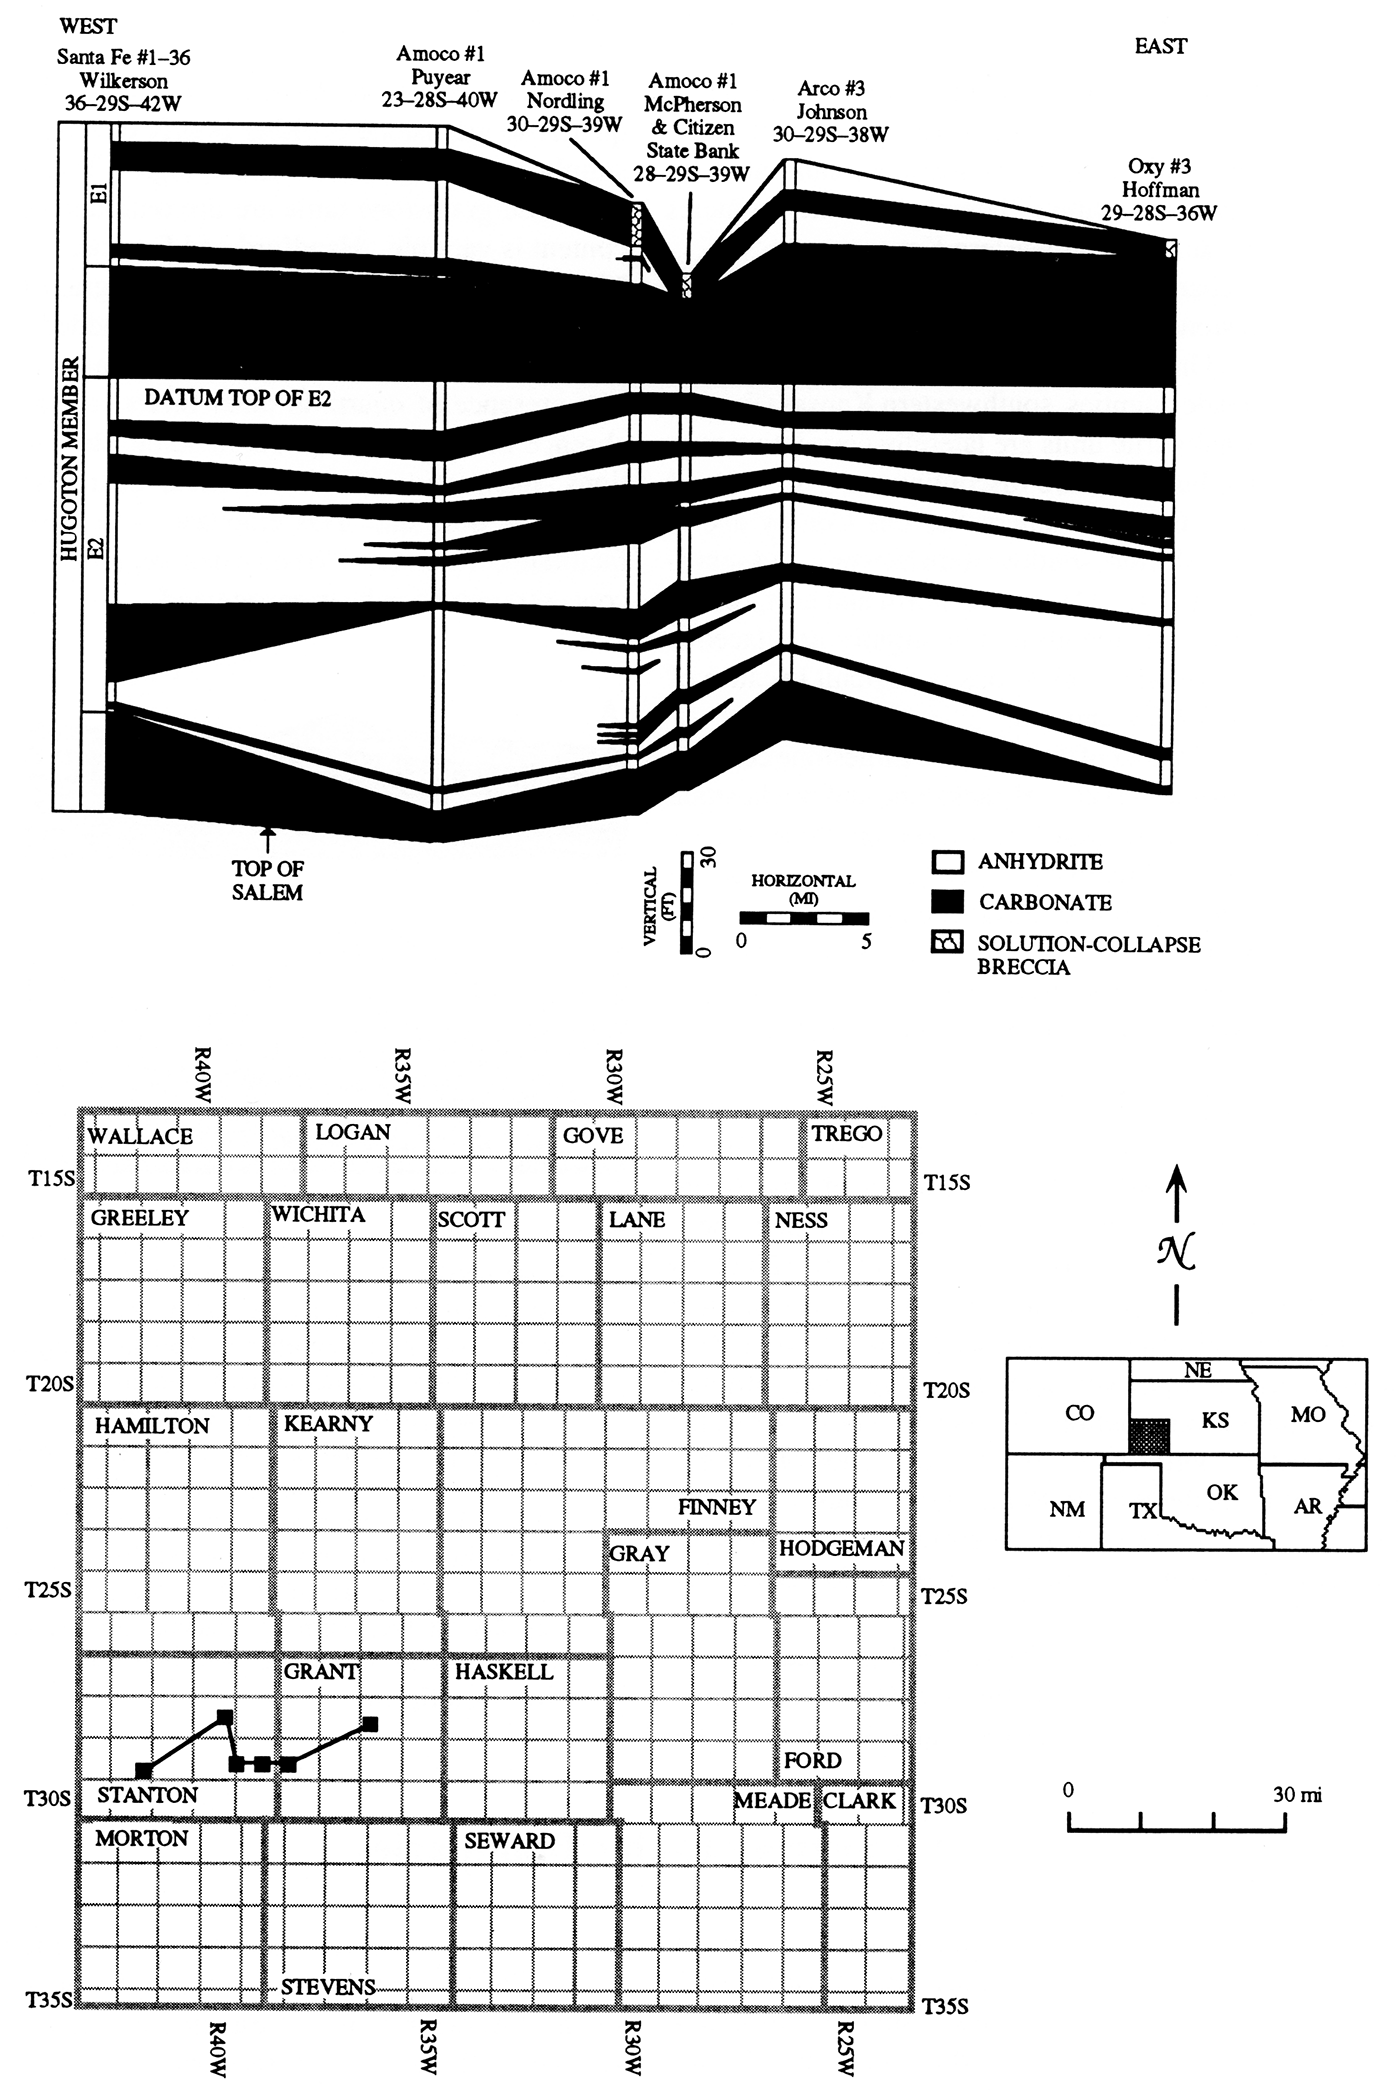 East-west stratigraphic cross section of Hugoton Member anhydrite.